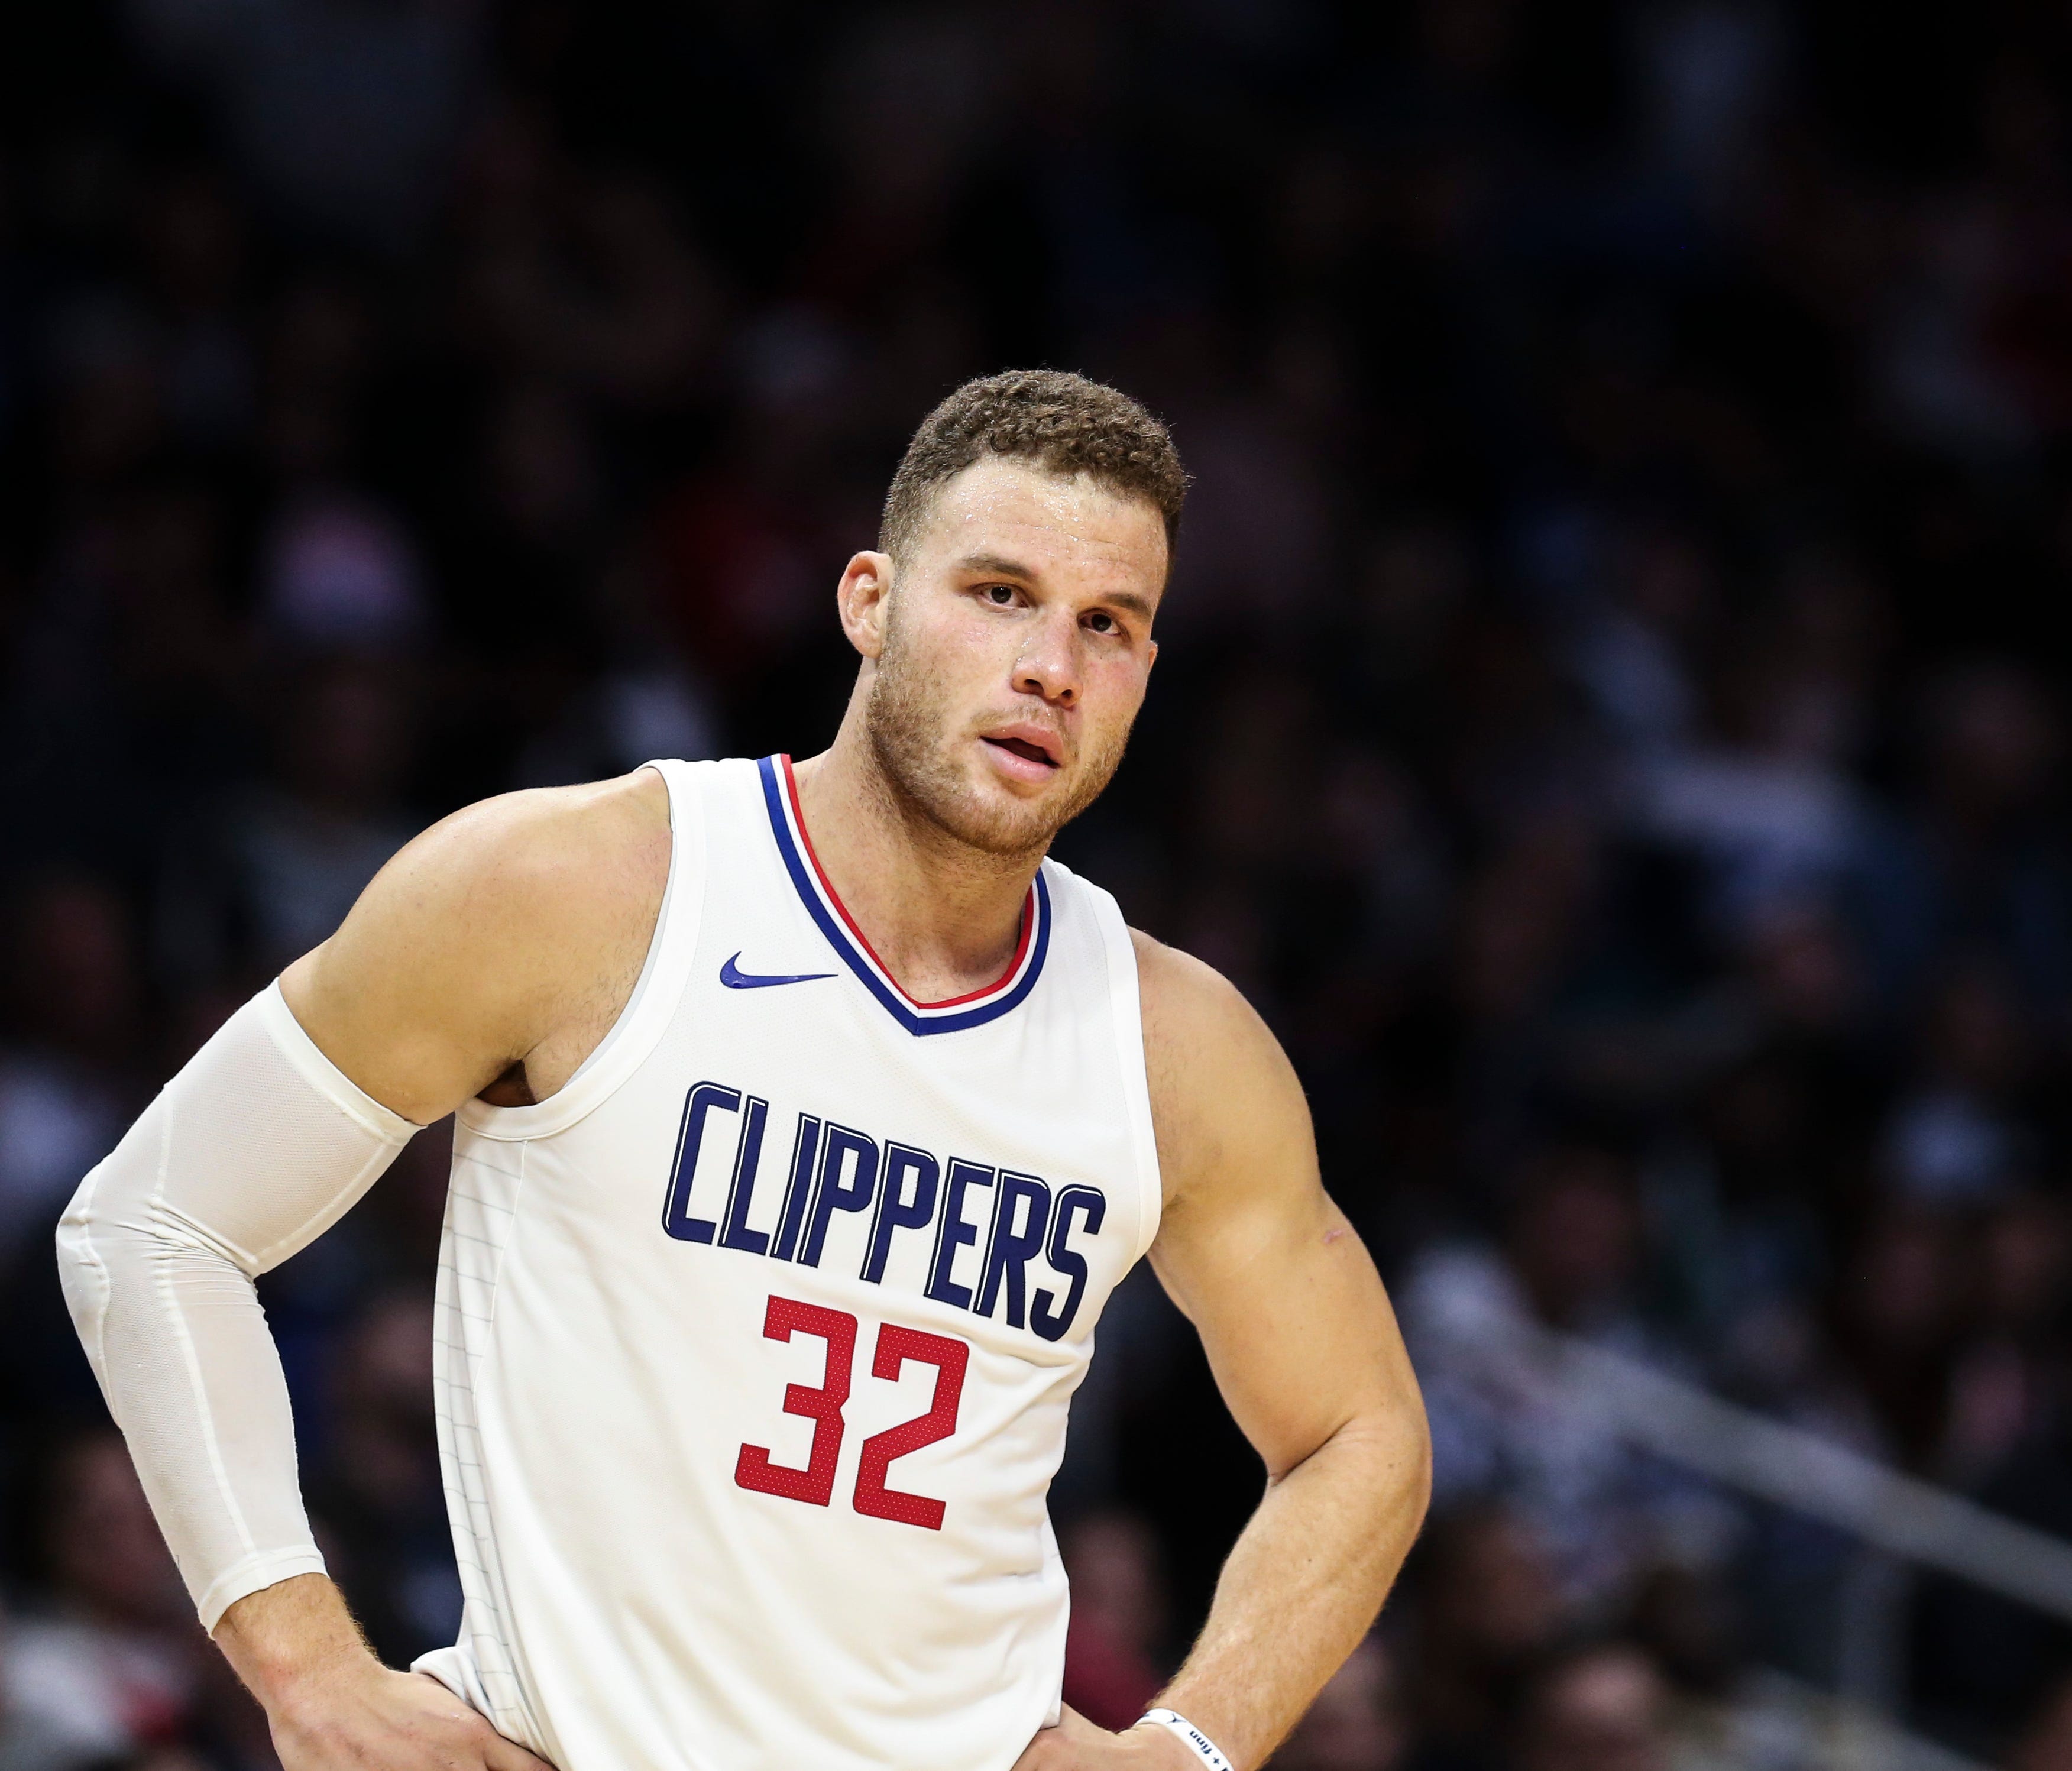 Los Angeles Clippers forward Blake Griffin in action during a game between the Los Angeles Clippers and Dallas Mavericks.